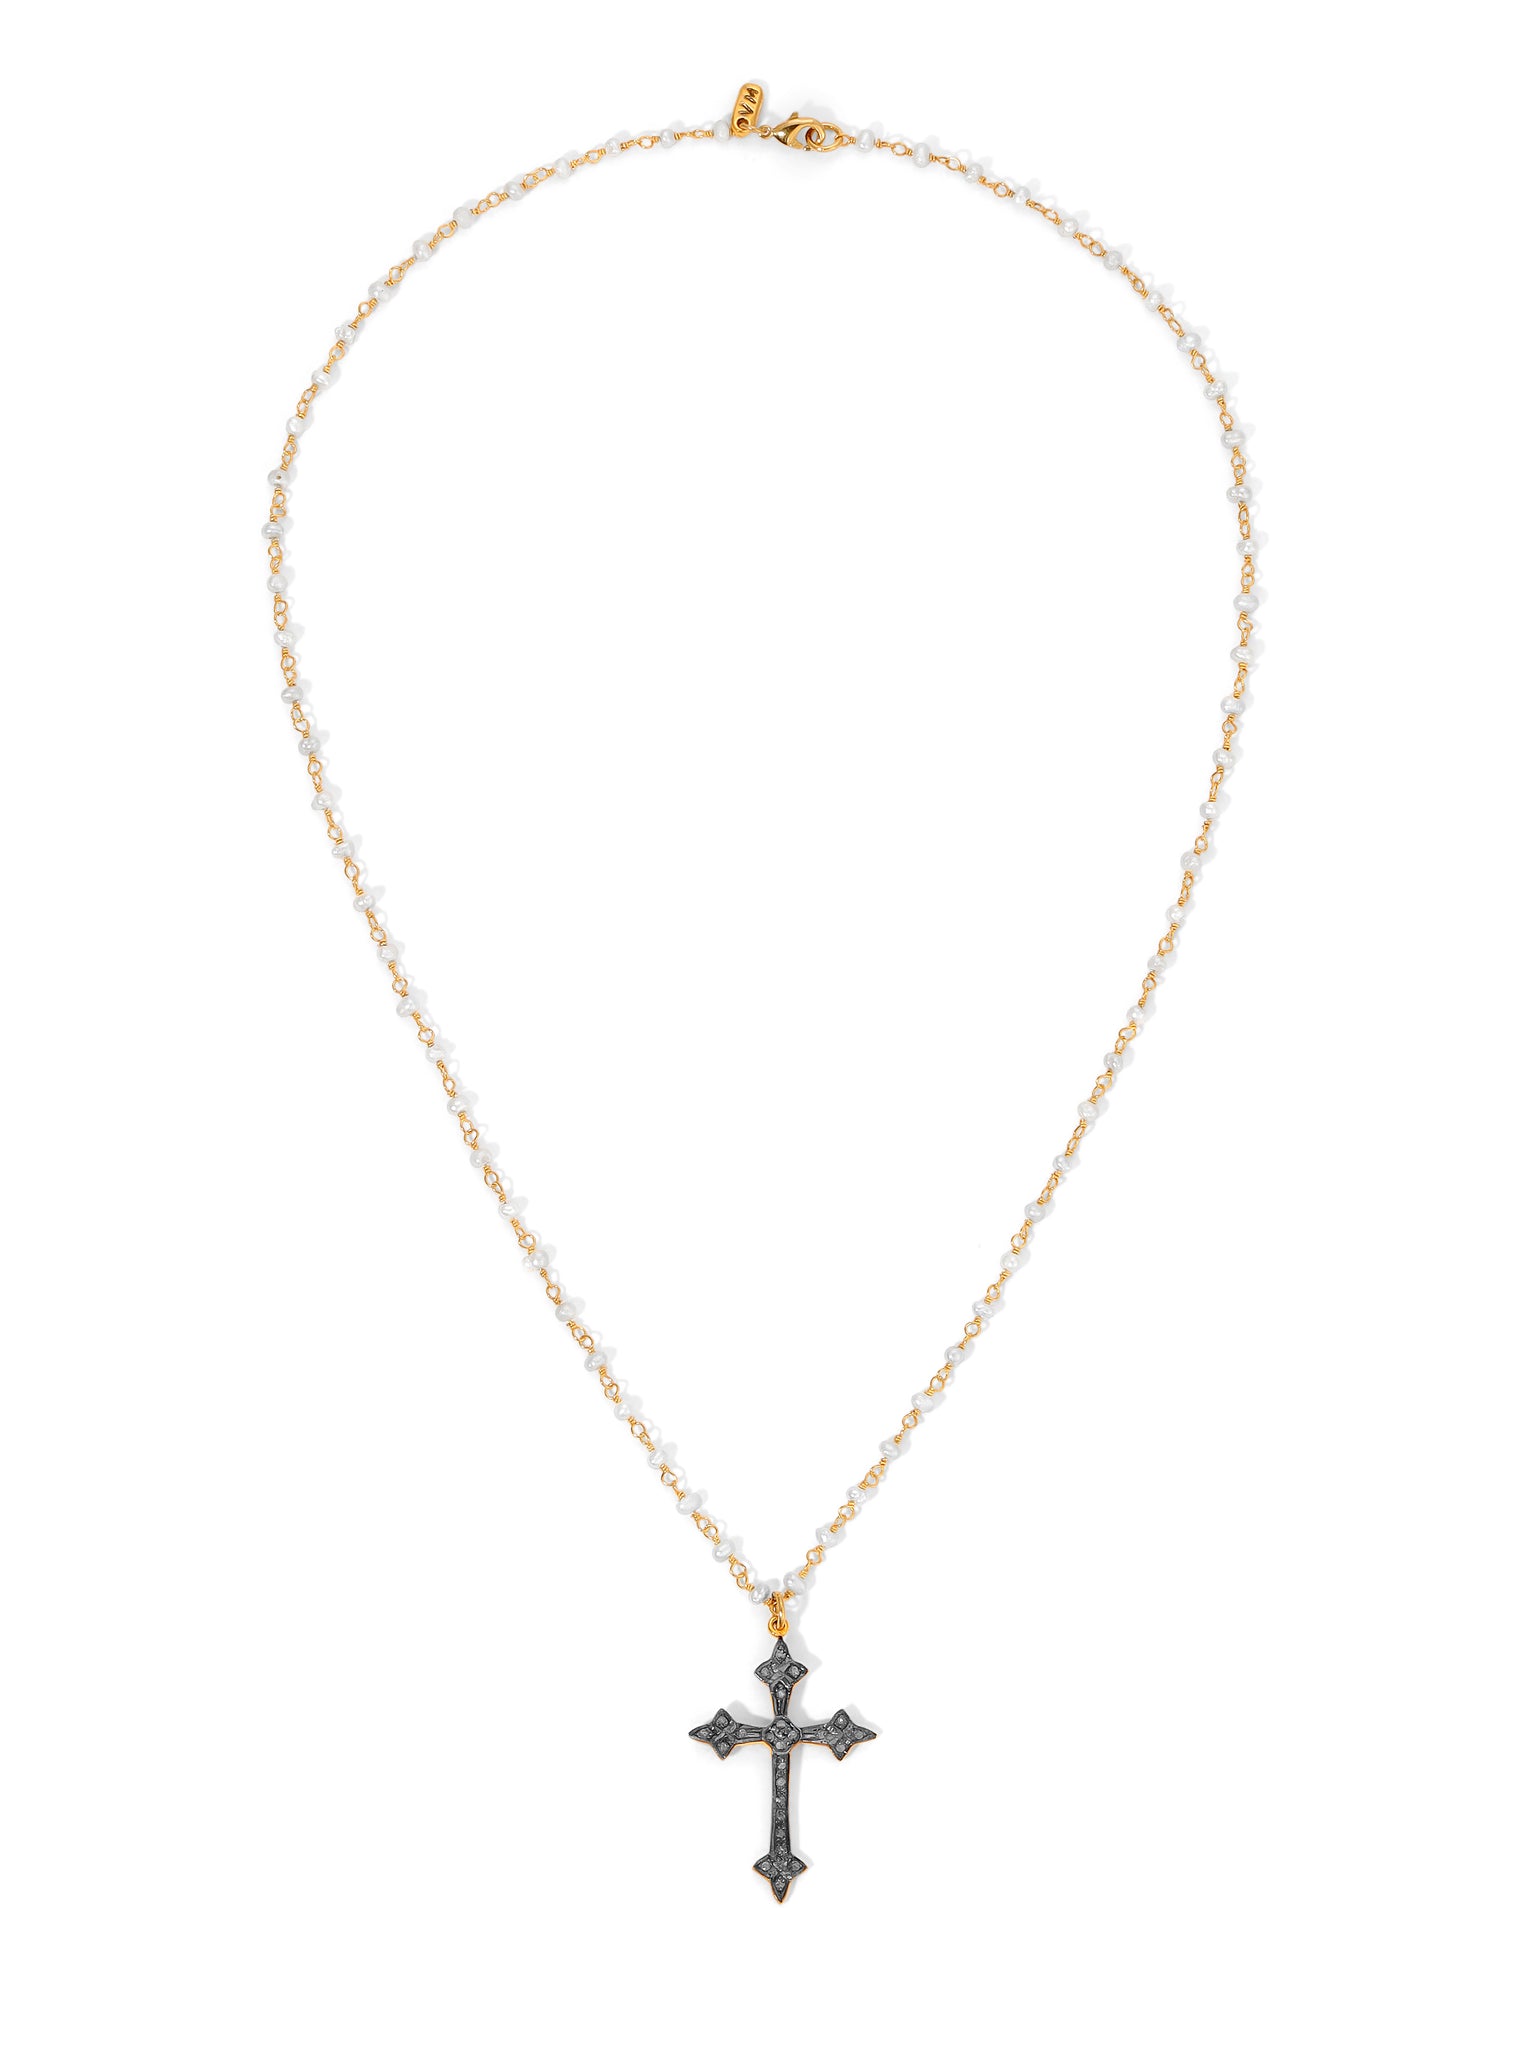 The Florentine Cross Necklace